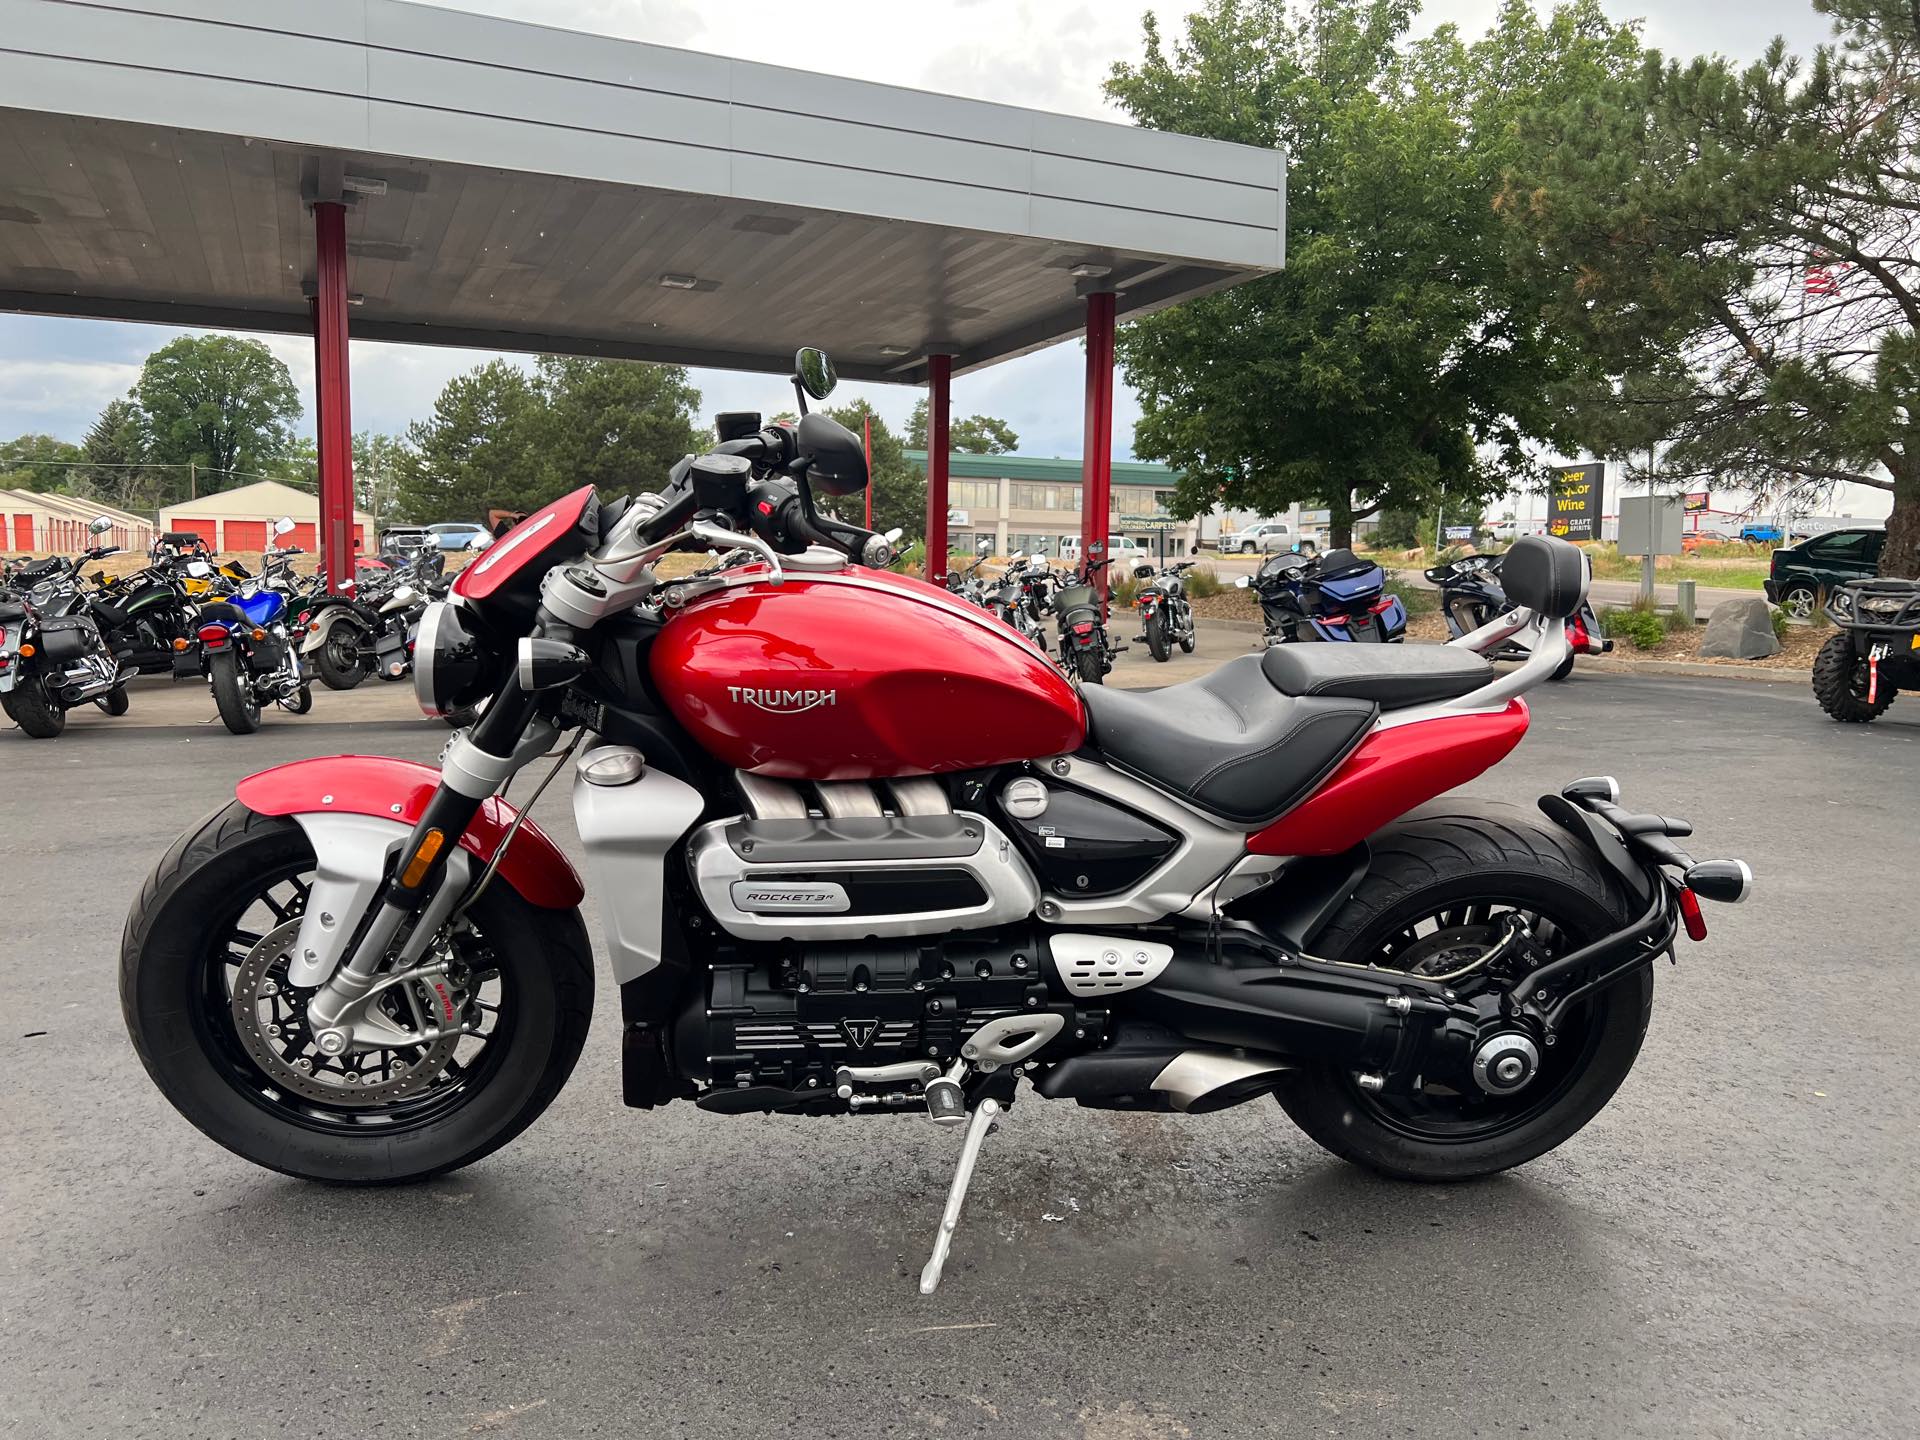 2020 Triumph Rocket 3 R at Aces Motorcycles - Fort Collins